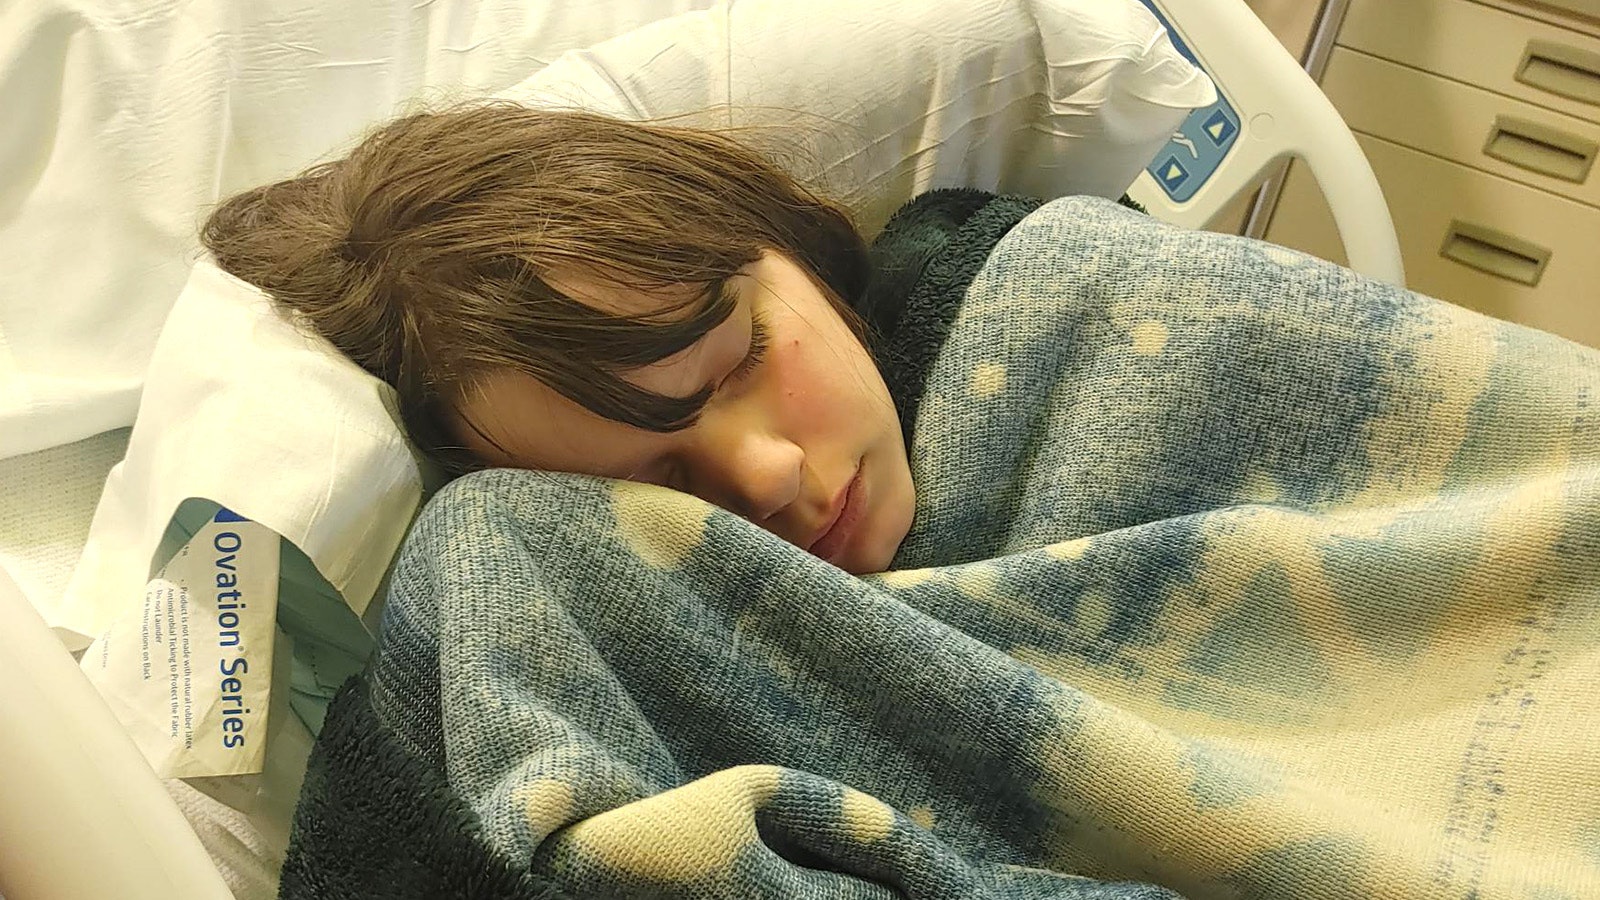 Talyn Reimer, 10, of Rawlins rests in a Denver hospital after being diagnosed with a large tumor in his head.